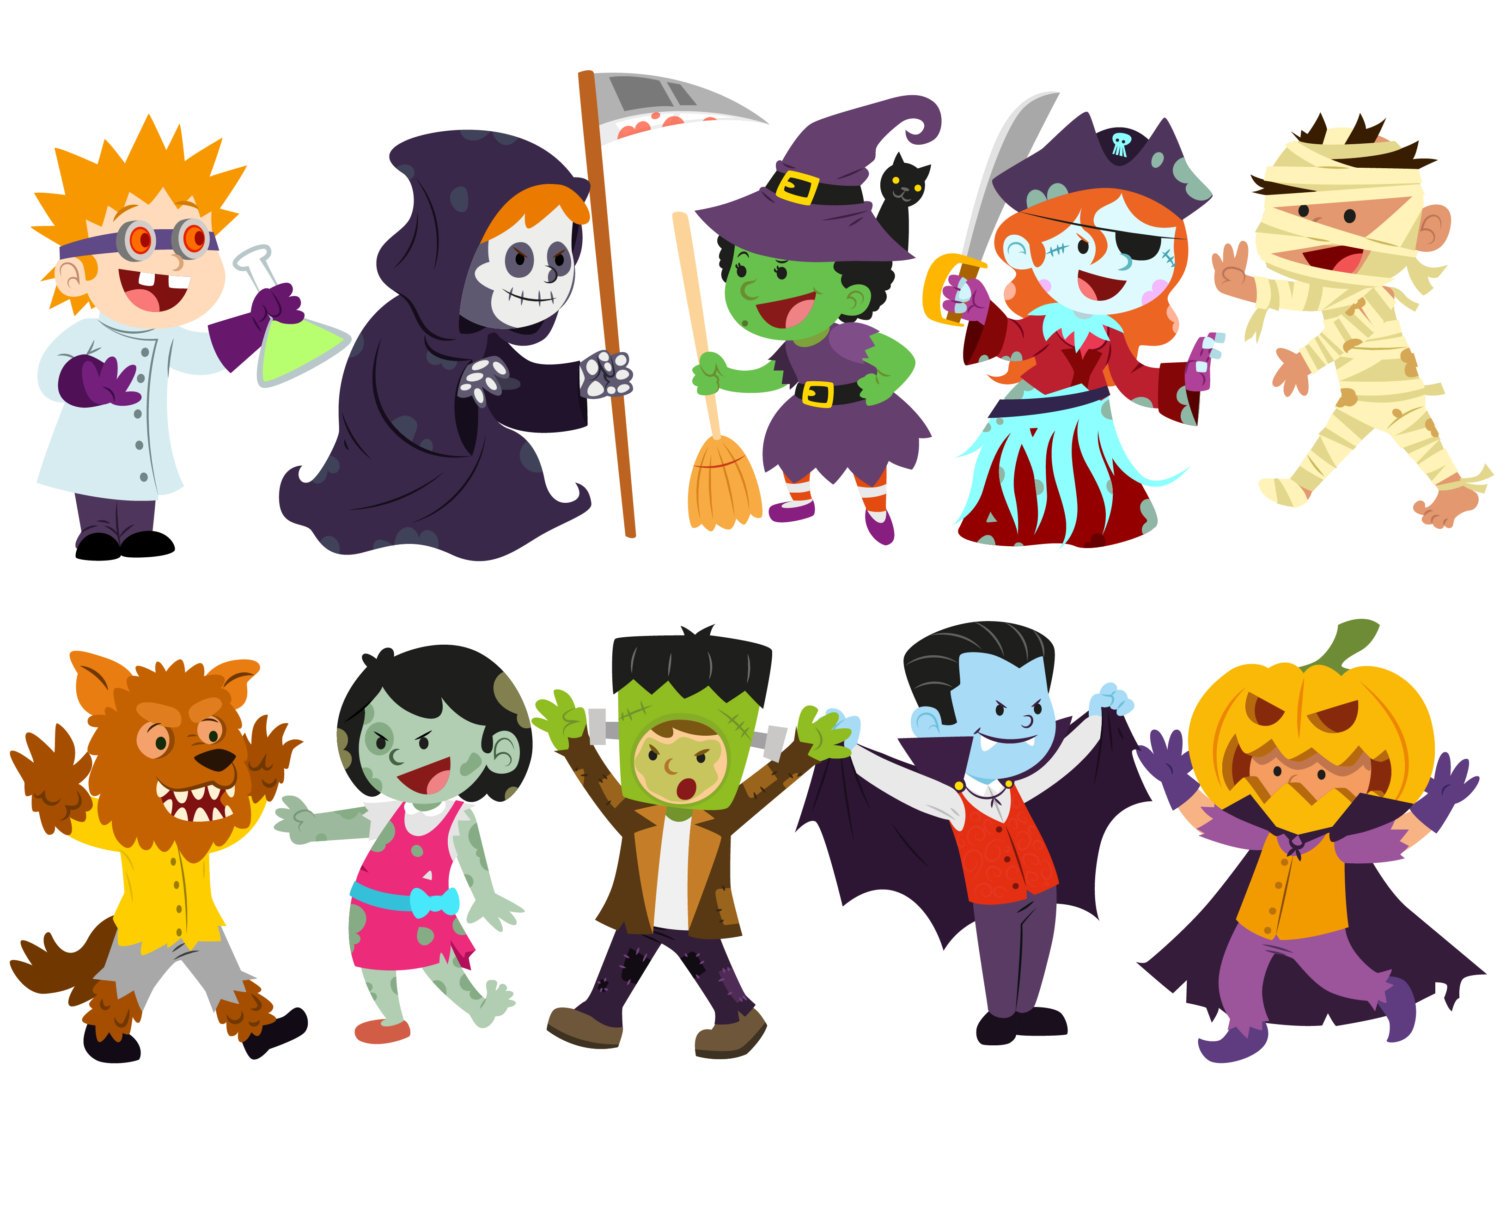 Clip Arts Related To : cute halloween faces clip art. view all Halloween .....